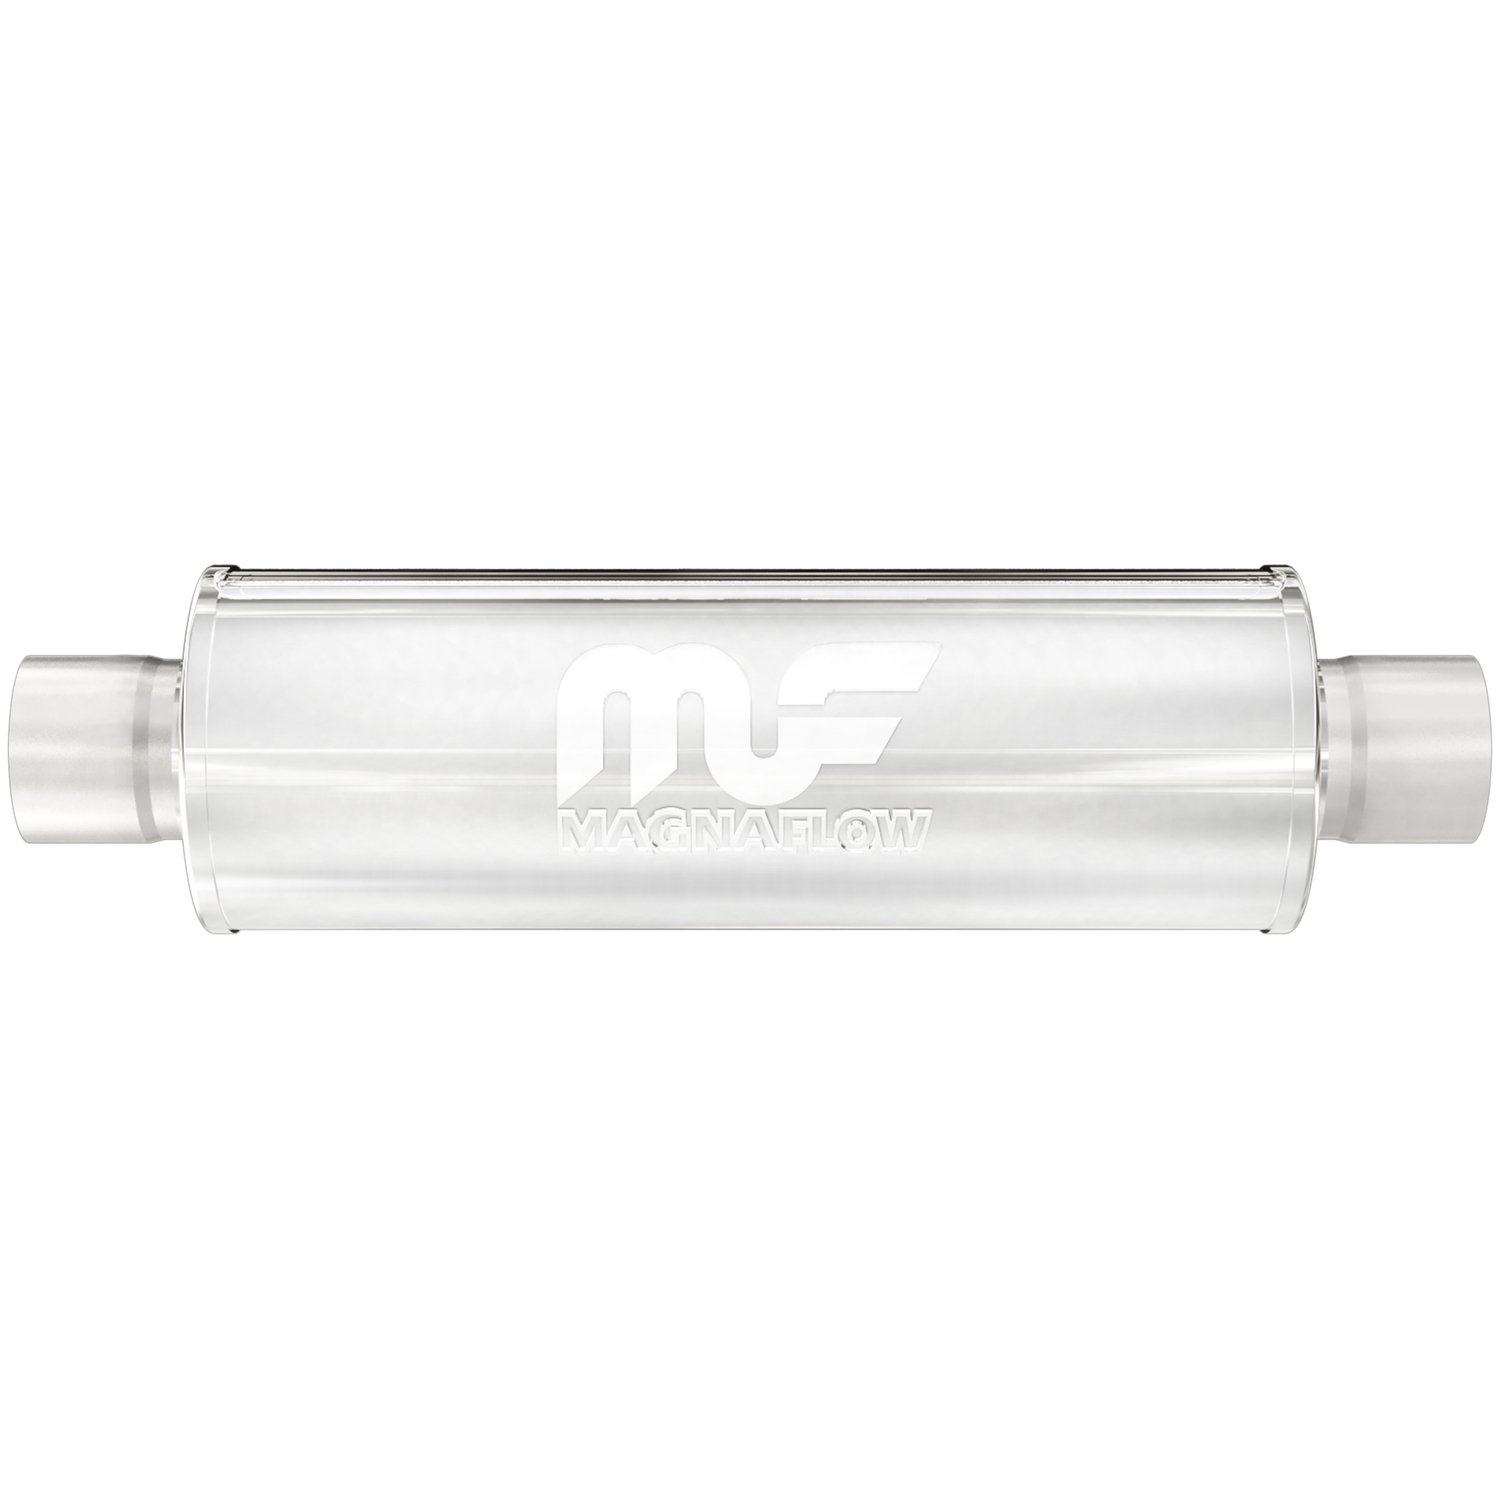 6" Round Muffler Center In/Center Out: 2.5" Body Length: 14" Overall Length: 20" Core Size: 2.5" Satin Finish